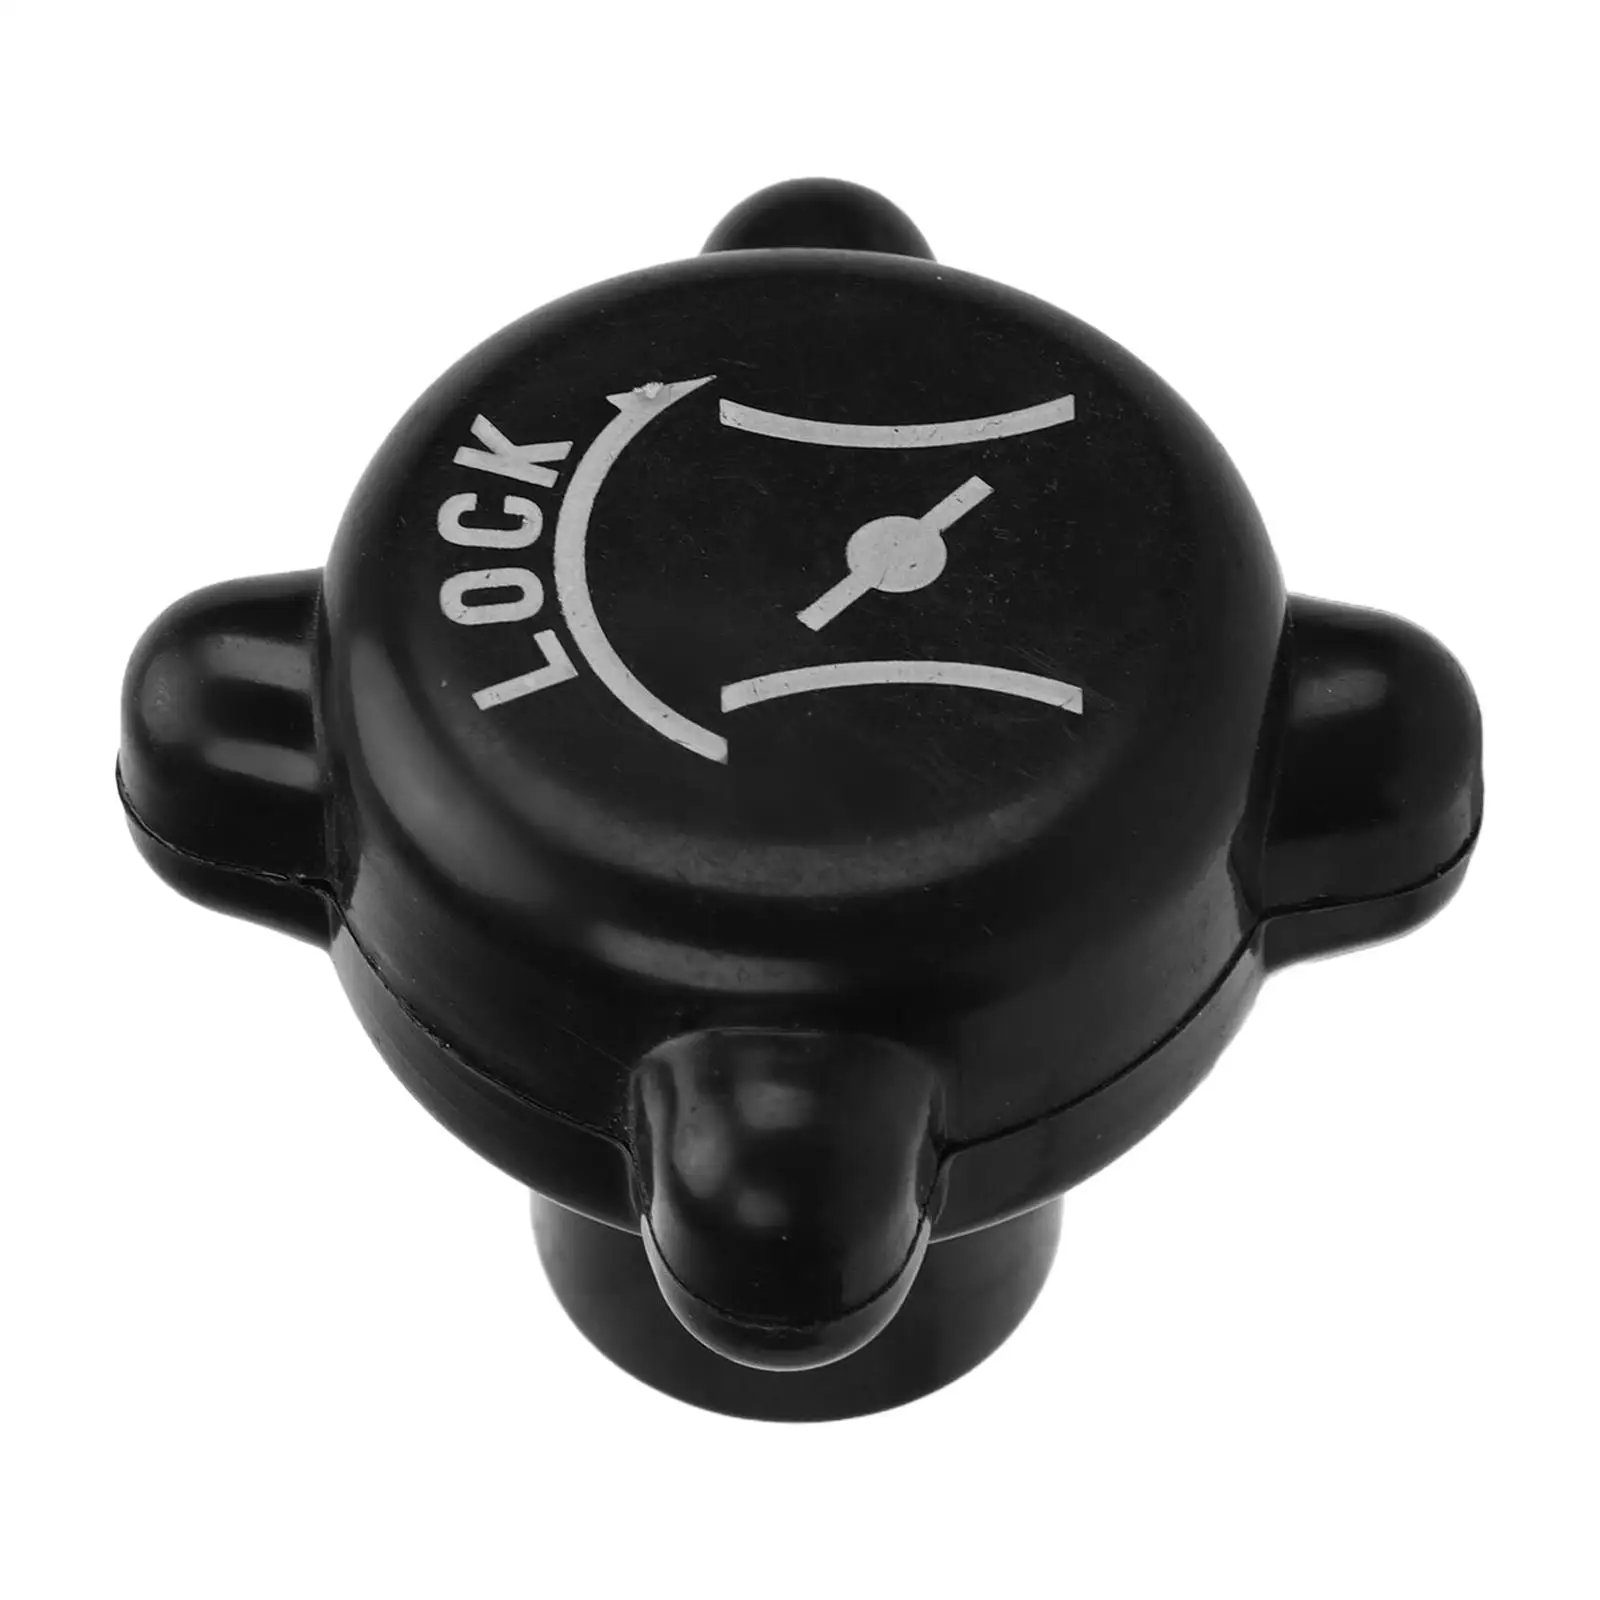 Hand Throttle Control Button Car Styling Control Knob Button for Nissan